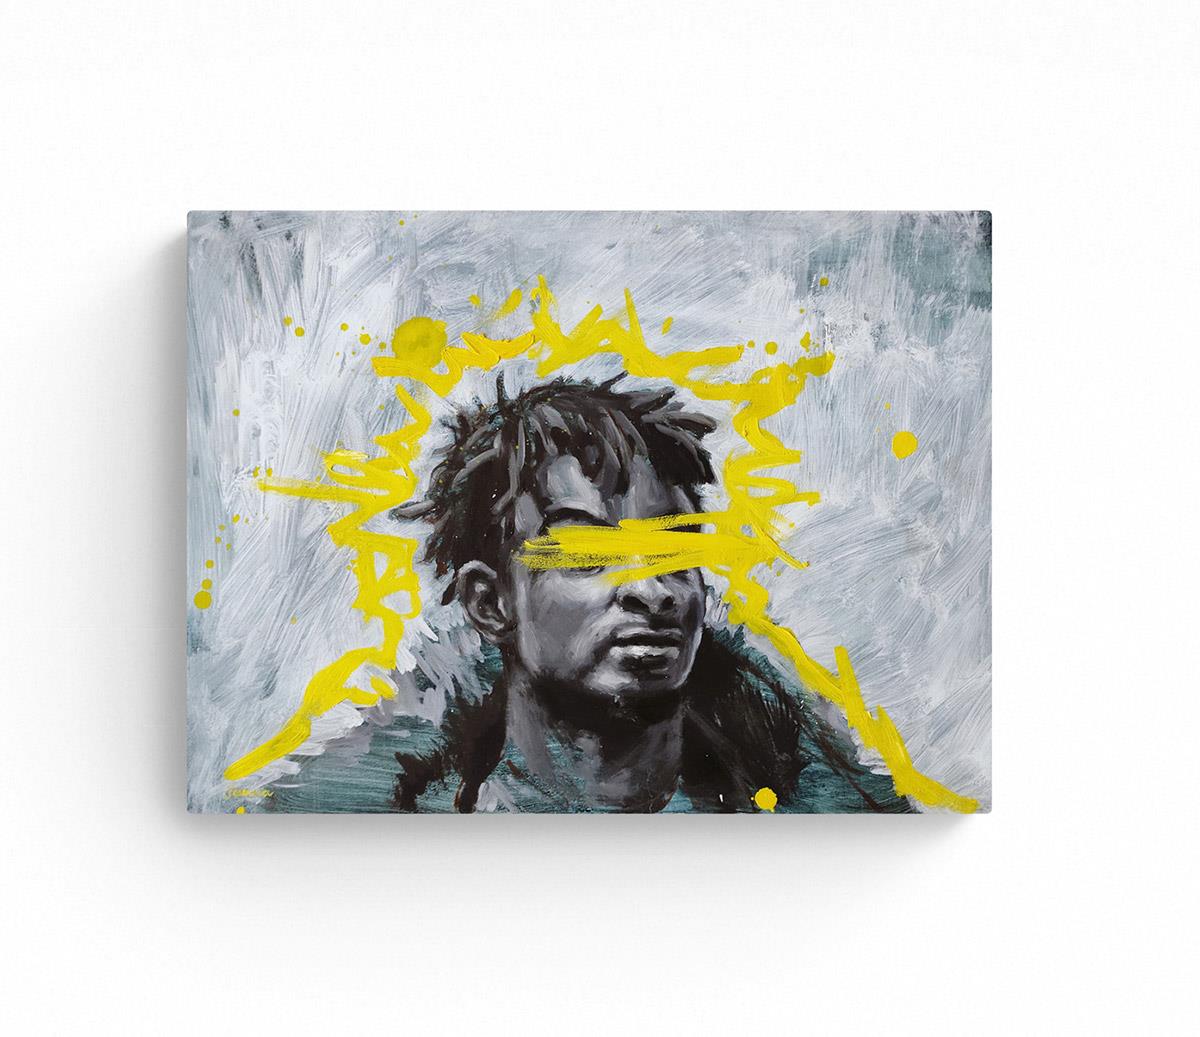 portrait painting with yellow graffiti tag